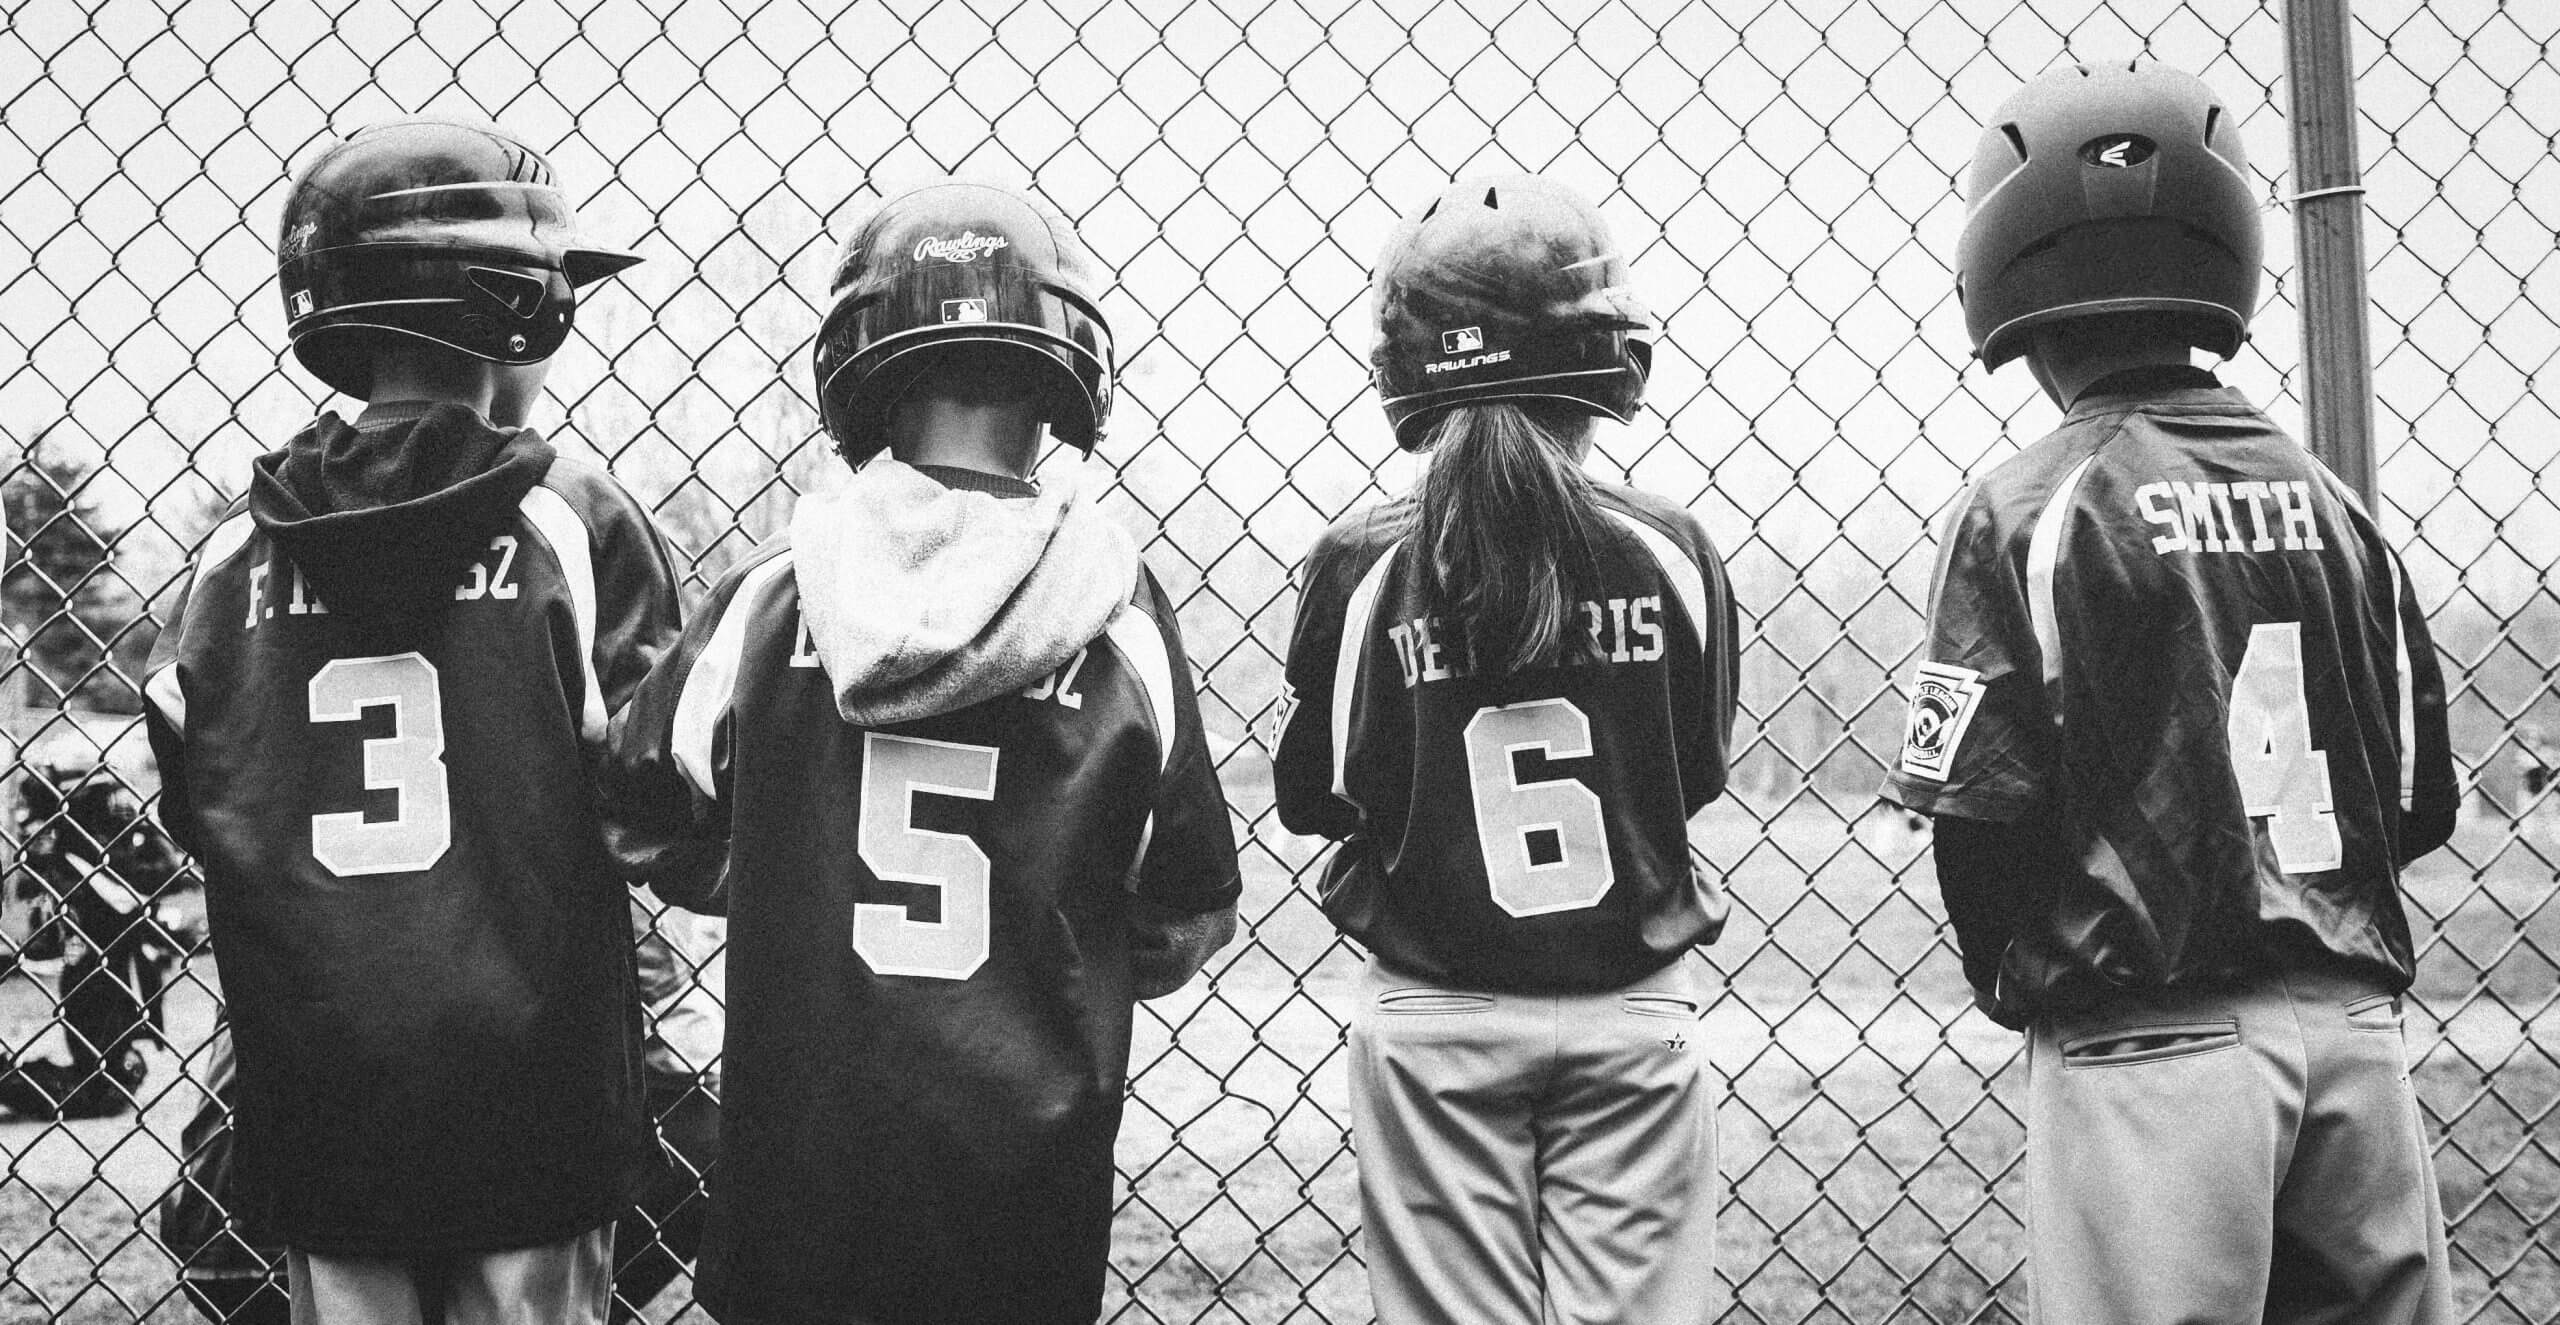 Four children in baseball uniforms stand behind a metal fence and look forward at the baseball field.